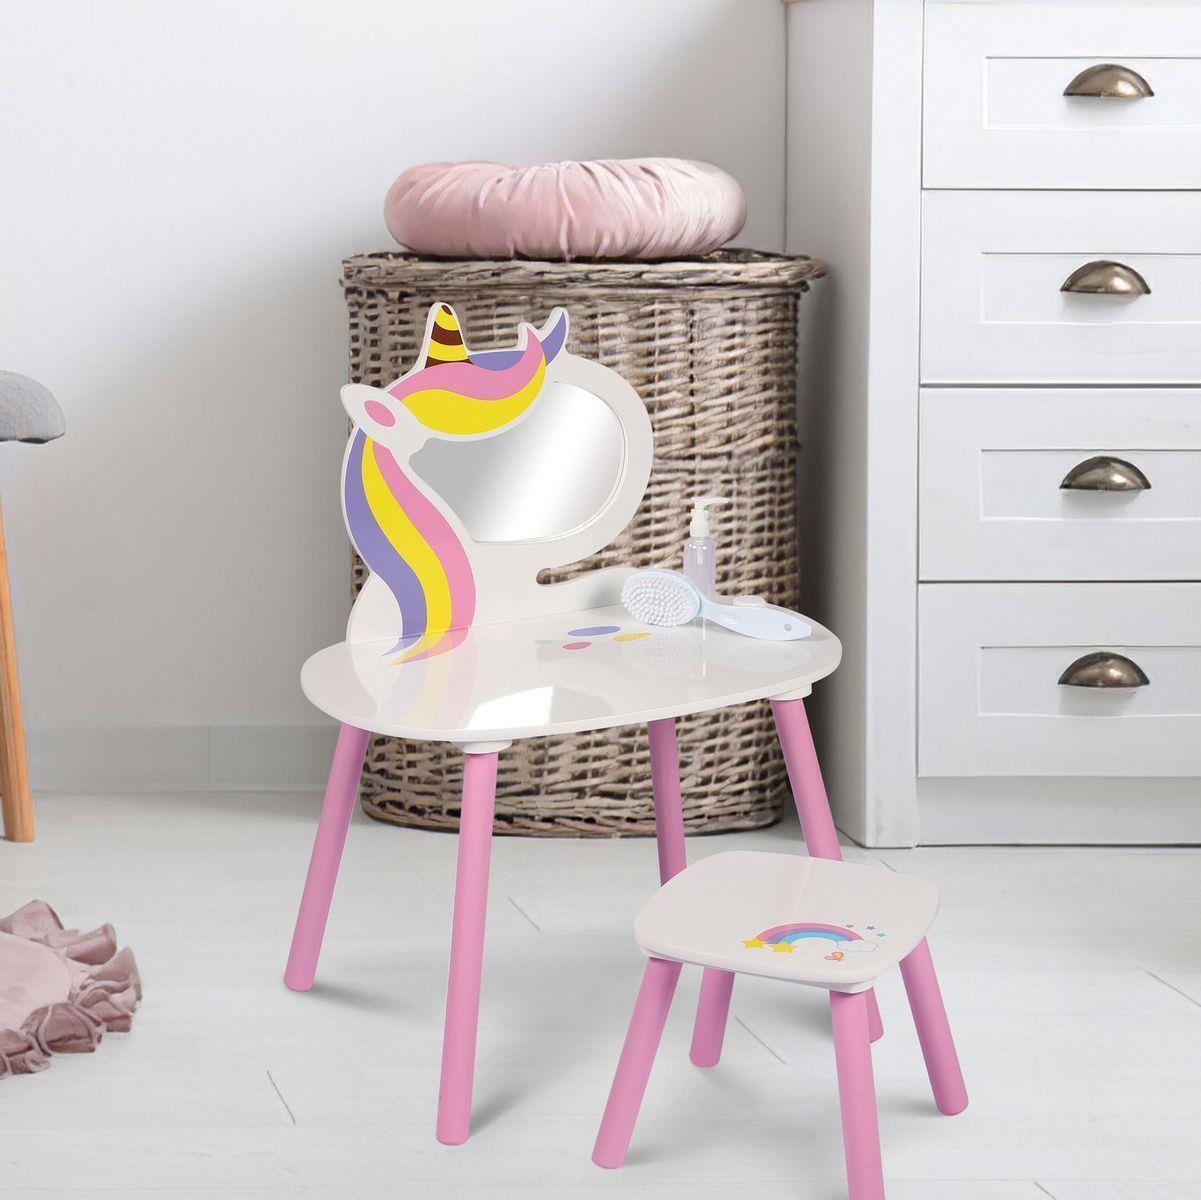 Princess Vanity Table with Stool Kids Play Toy by The Magic Toy Shop - The Magic Toy Shop